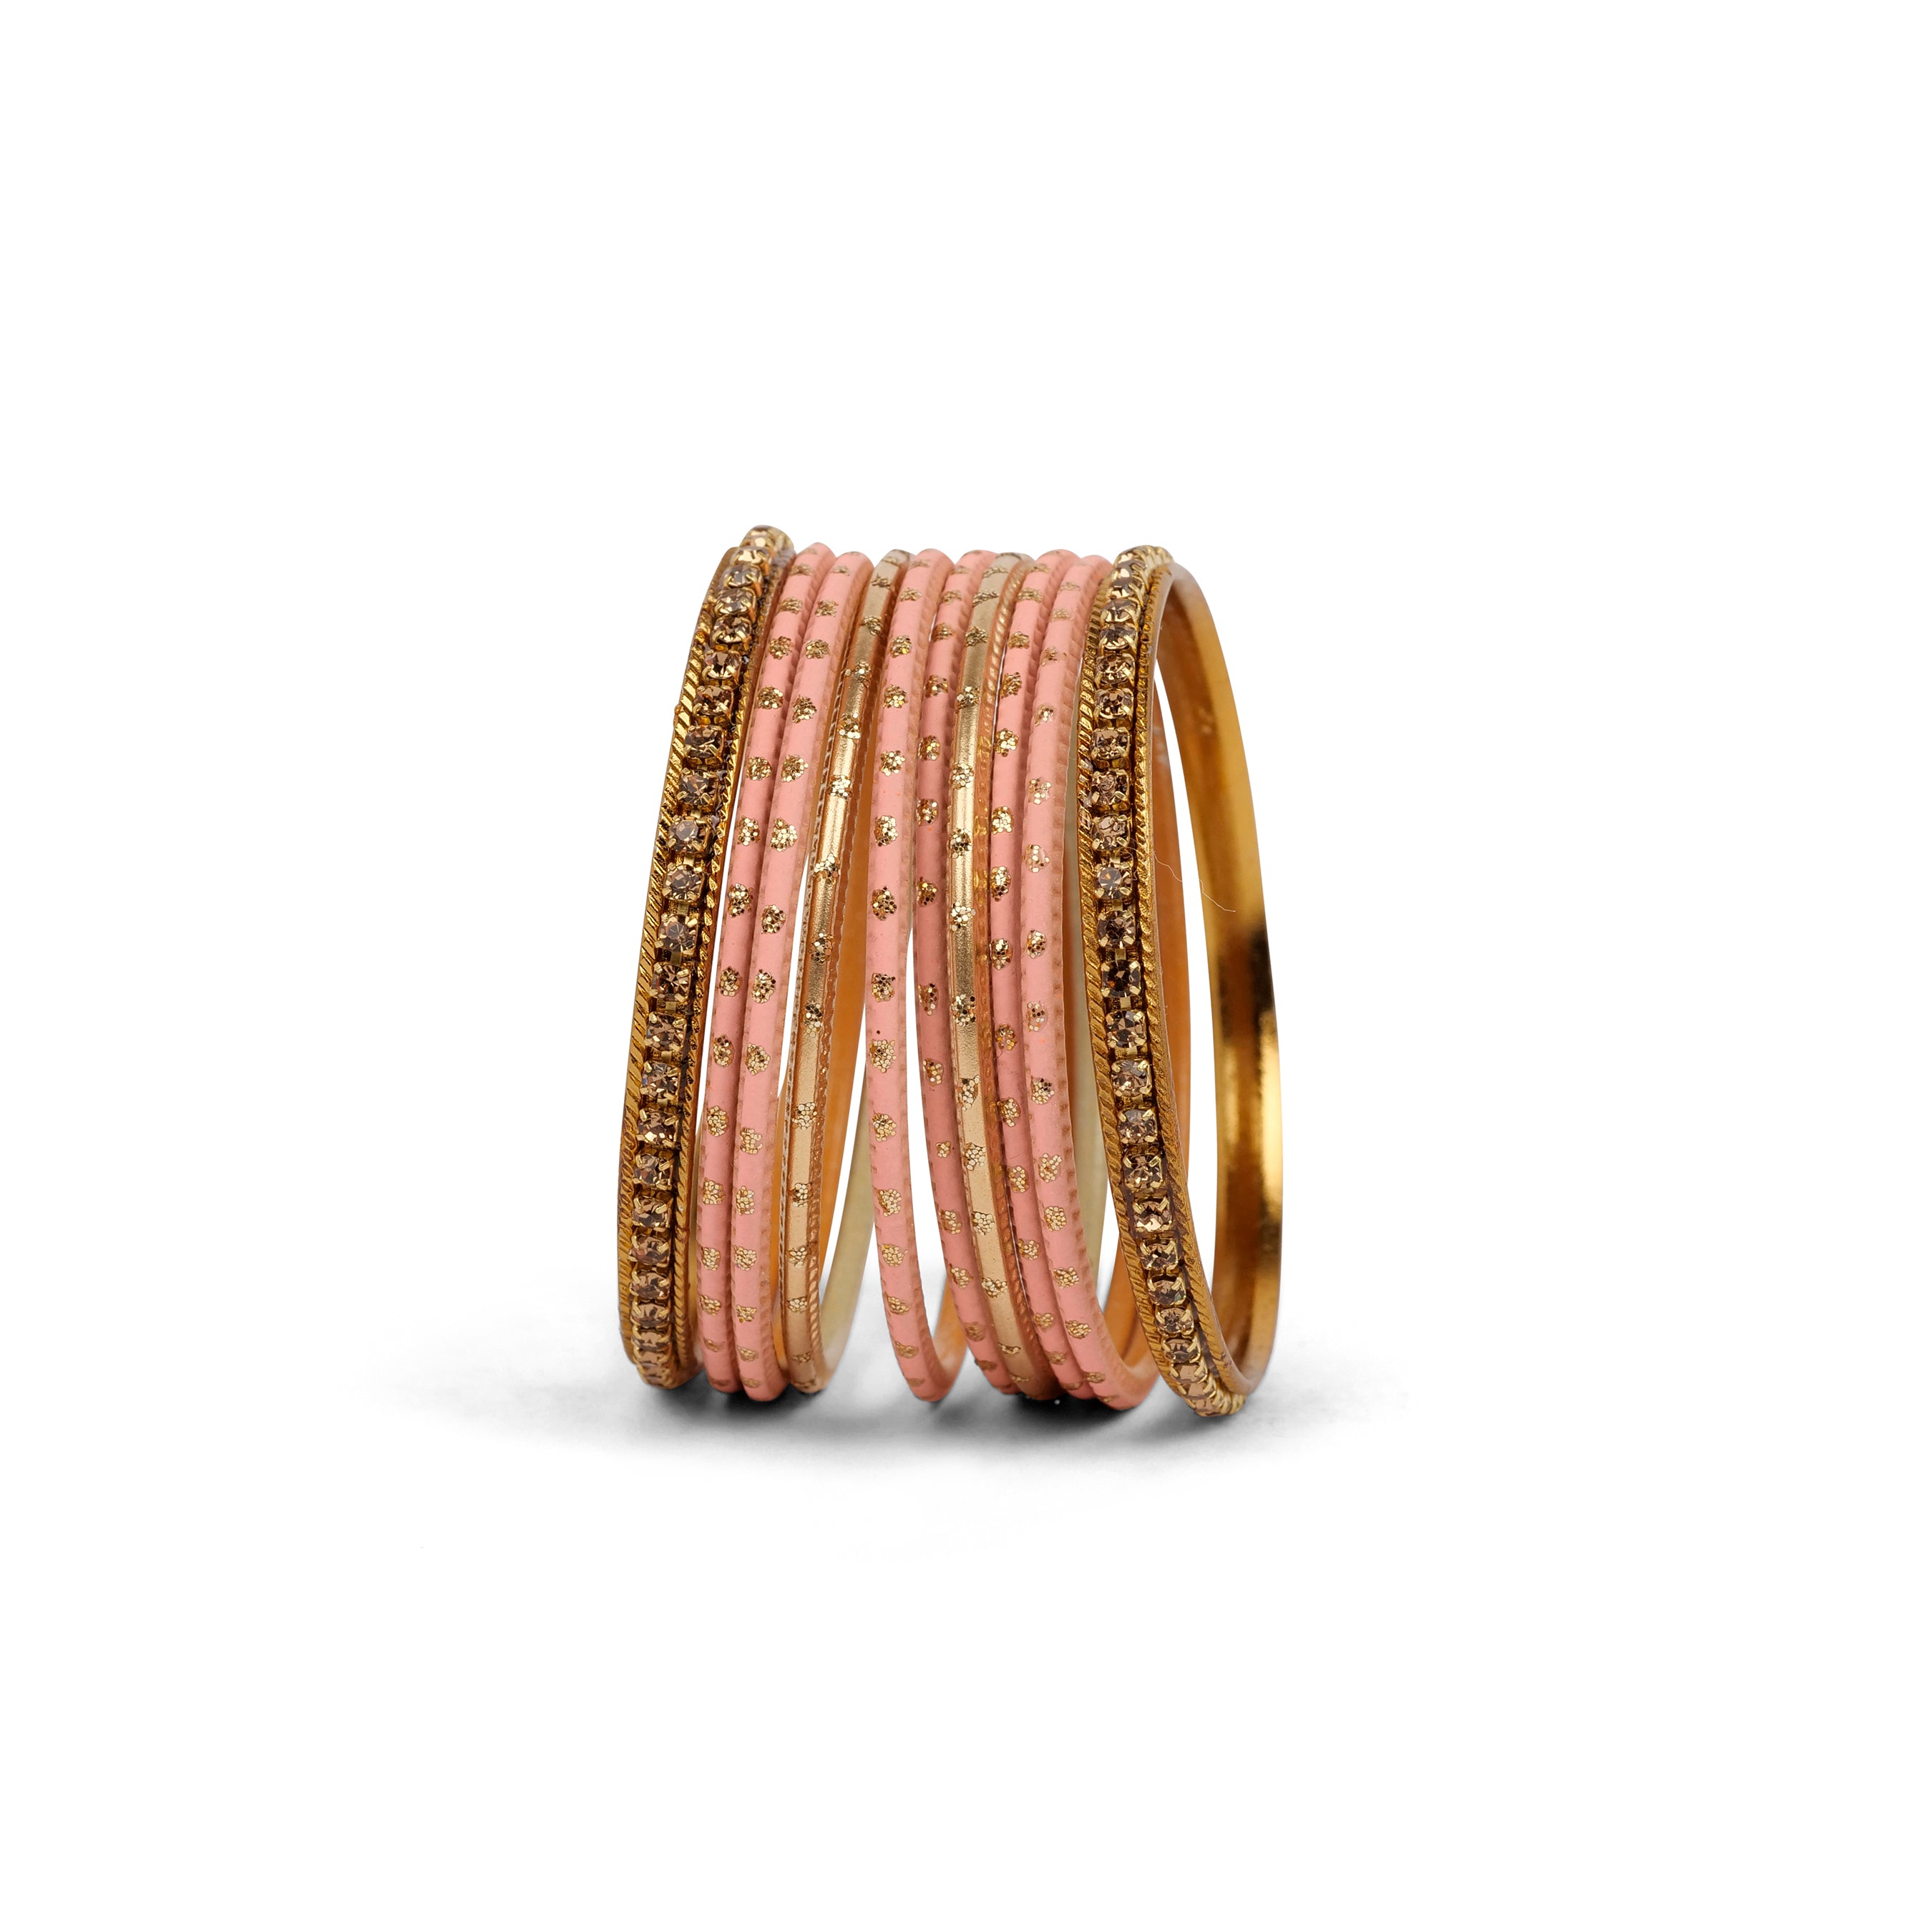 Children's Bangle Set in Peach and Antique Gold